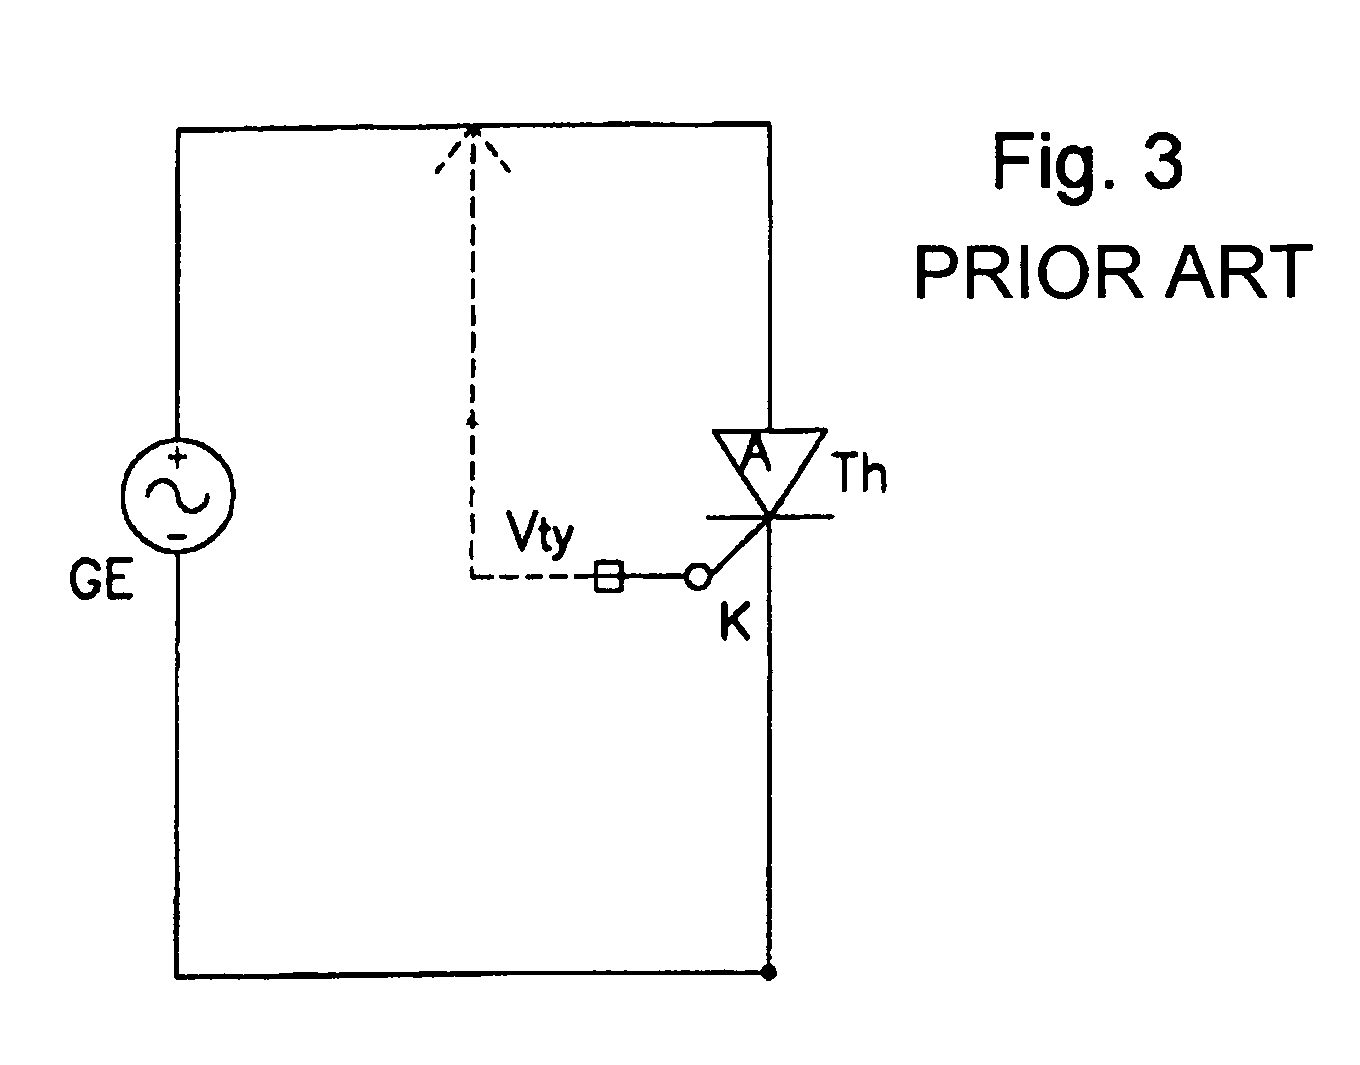 Voltage clamping circuit for a bicycle dynamo